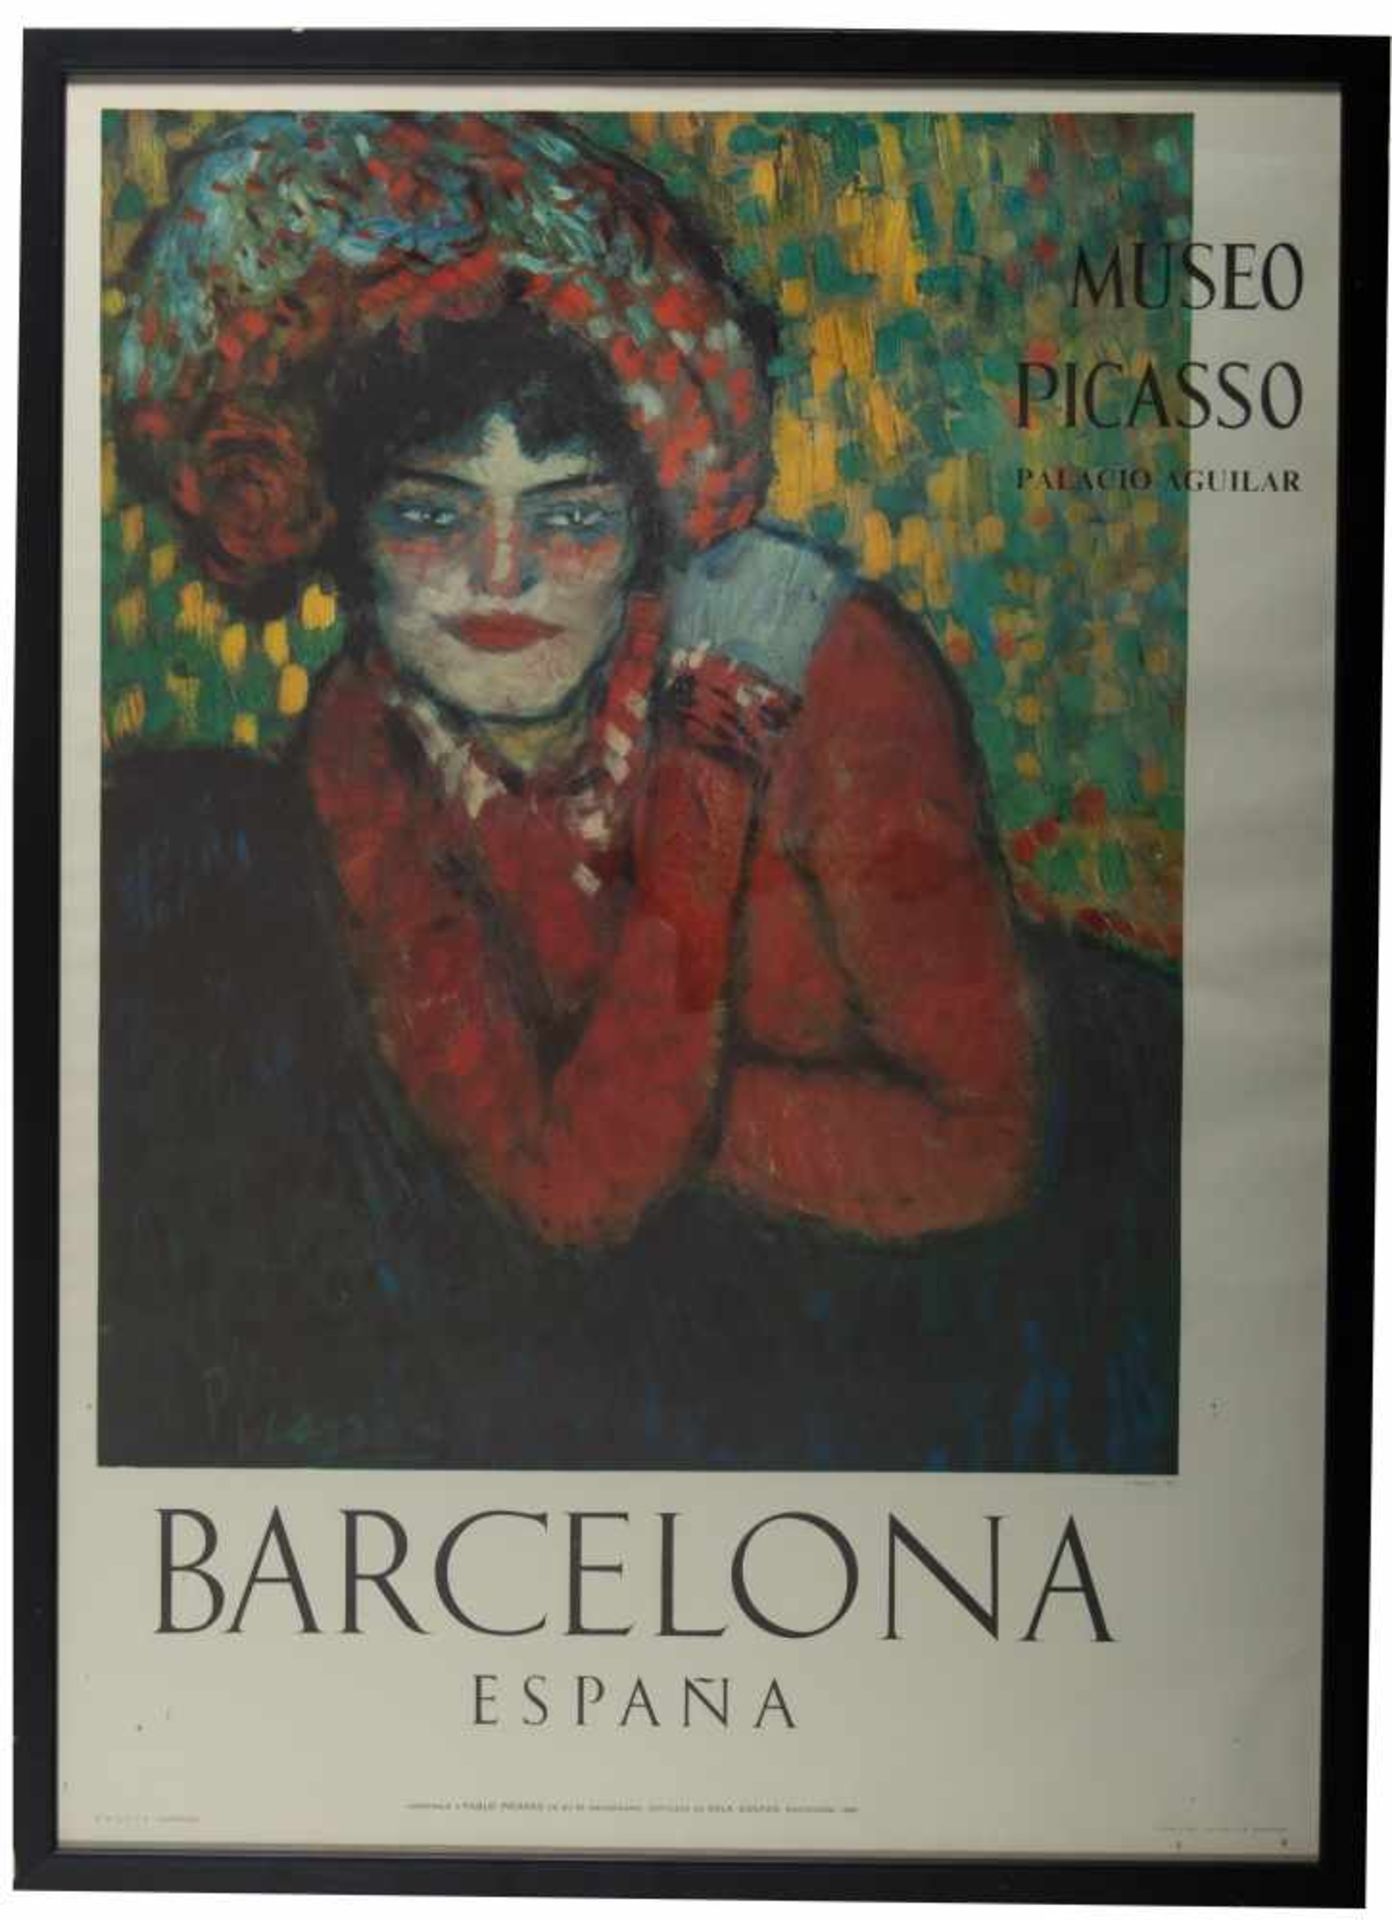 Historical vintage poster by Pablo Picasso - Image 3 of 4